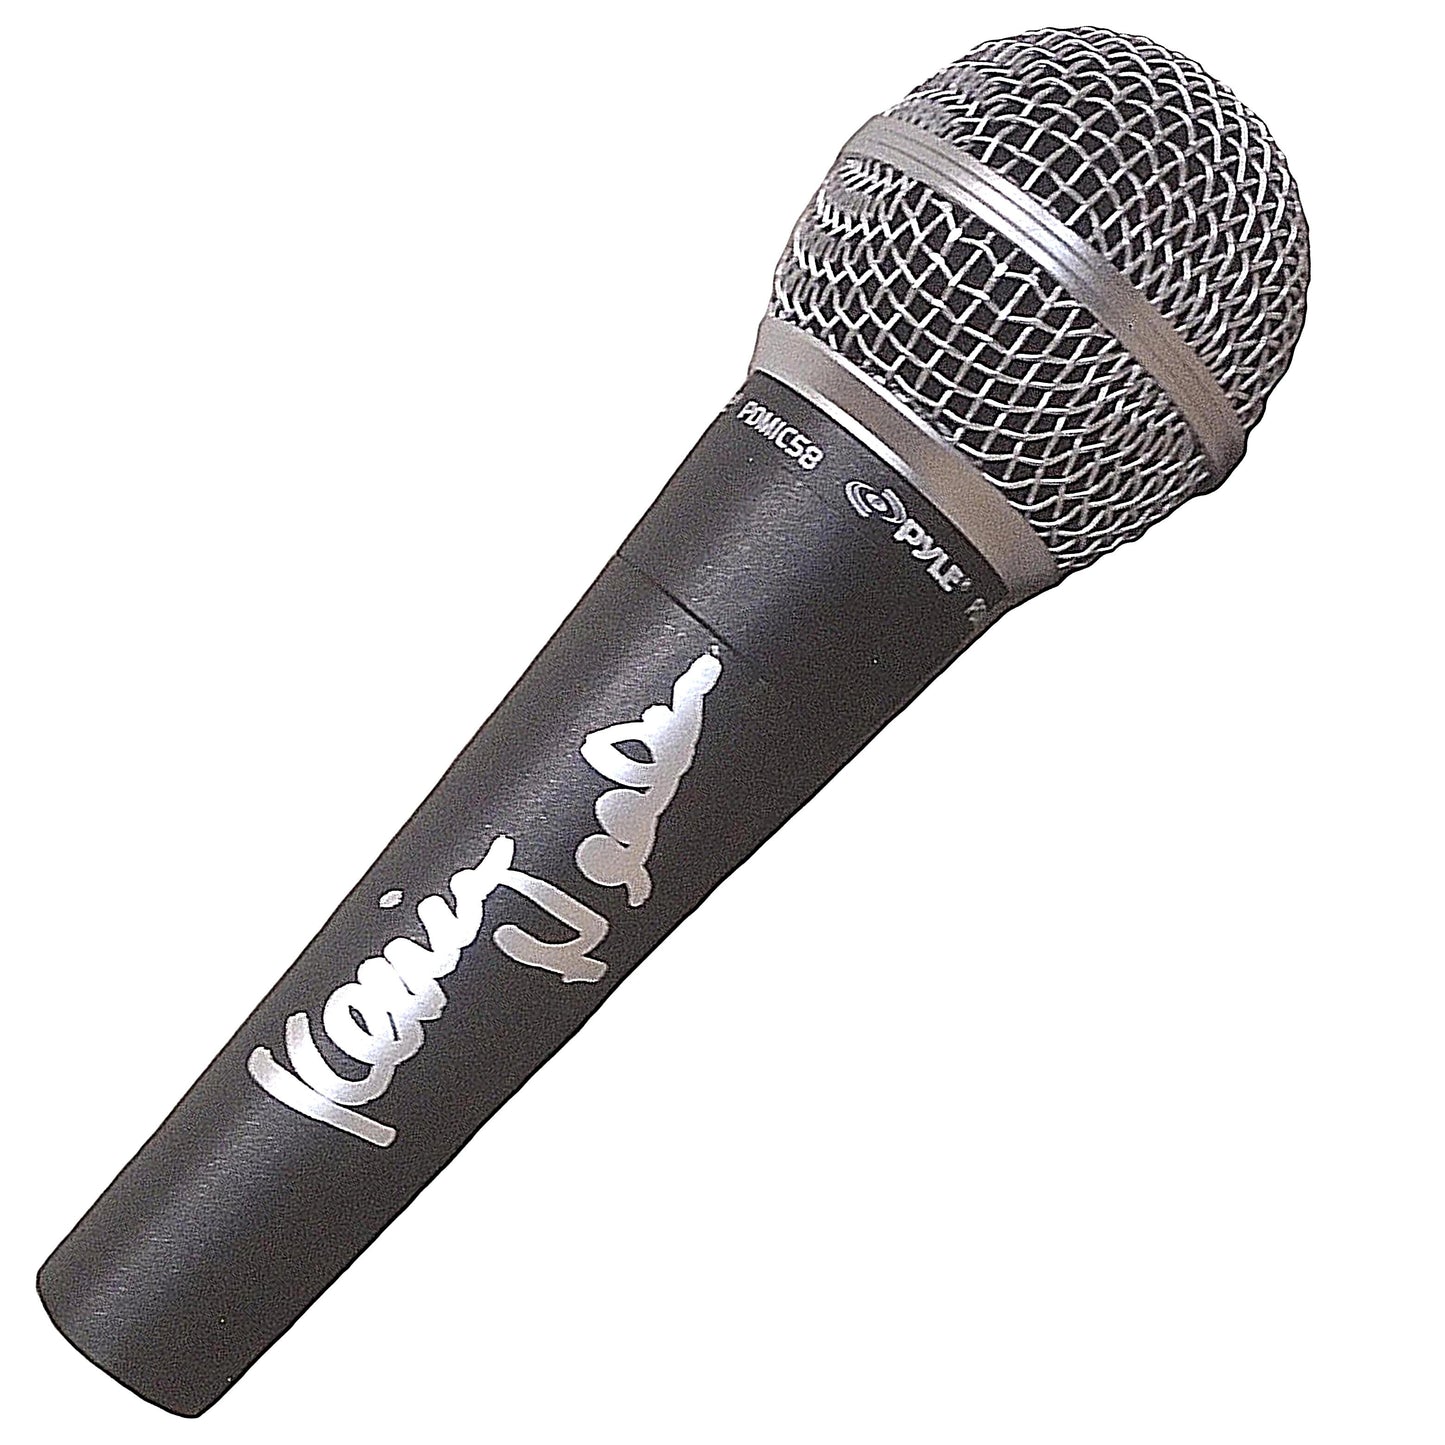 Hollywood-Autographed - Kevin Nealon Signed Pyle Full Size Microphone with Proof Photo - Beckett BAS 102a